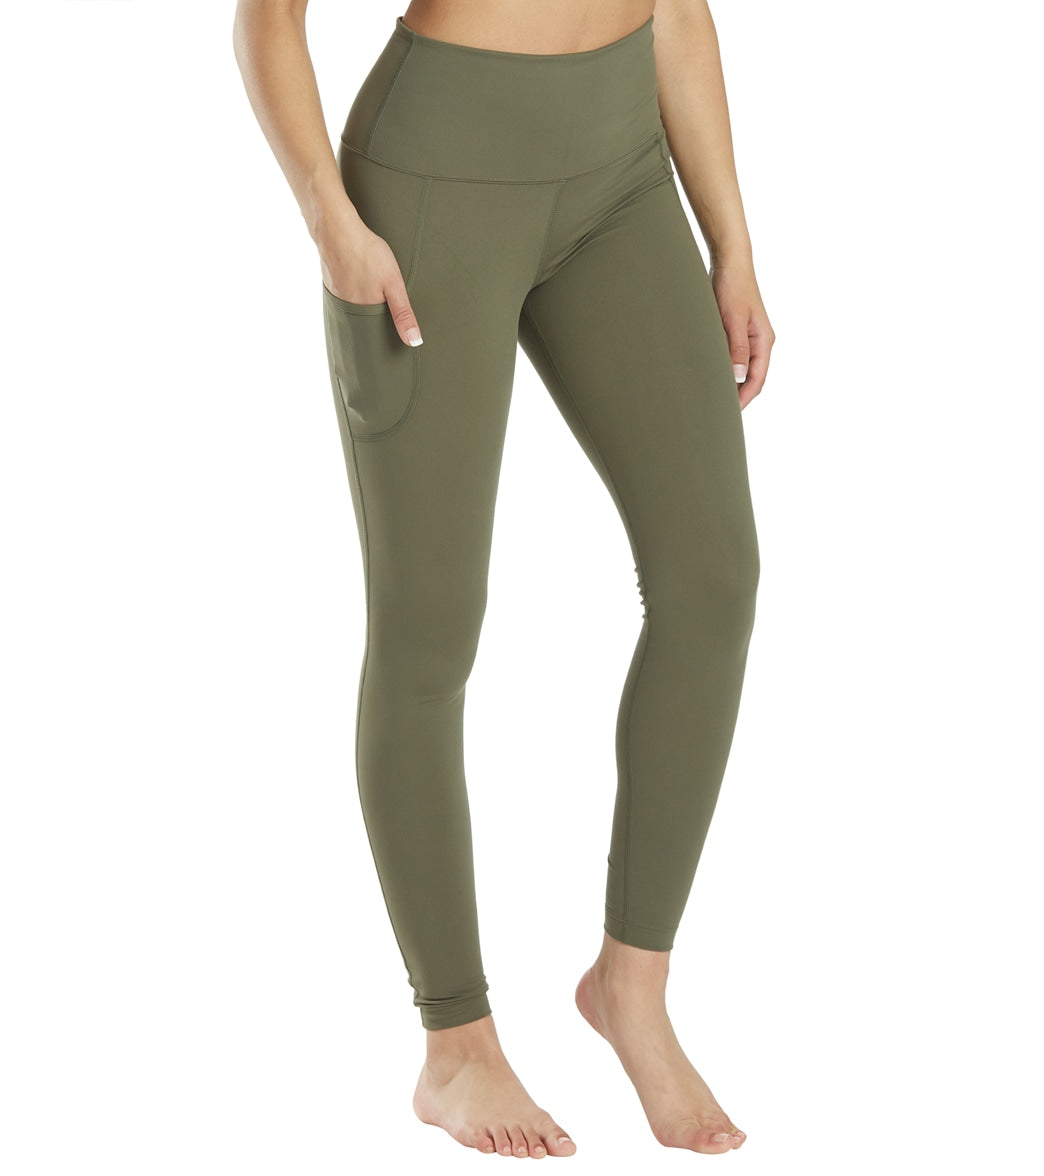 Everyday Yoga High Waisted Go-To Pocket Leggings at YogaOutlet.com